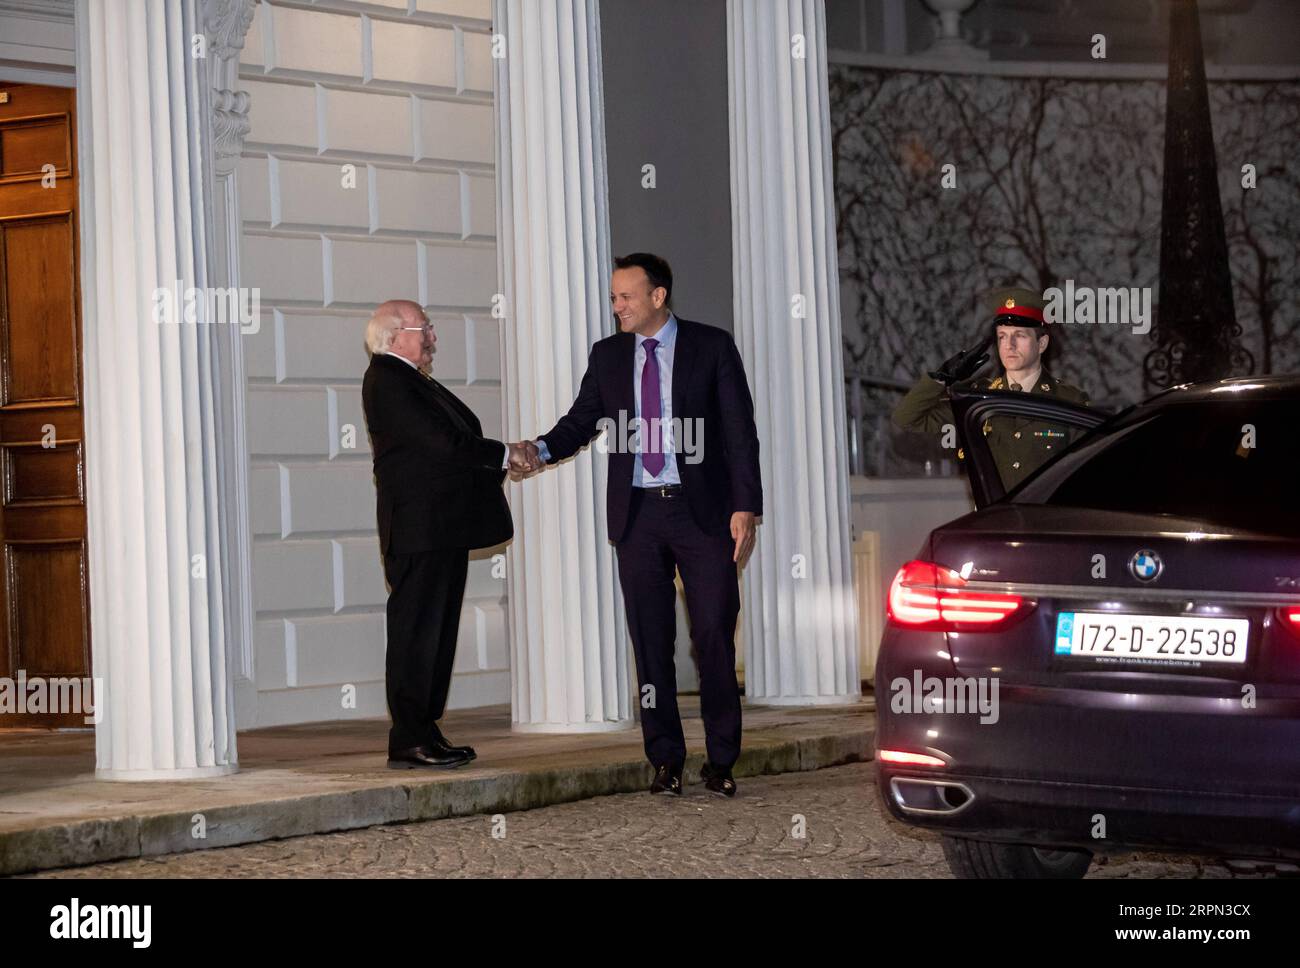 200221 -- DUBLIN, Feb. 21, 2020 -- Irish Prime Minister Leo Varadkar C leaves the official residence of the Irish president after tendering his resignation to Irish President Michael D. Higgins L in Dublin, Ireland, Feb. 20, 2020. The newly formed lower house of the Irish parliament failed to elect a new prime minister for the country during its first sitting held here on Thursday, reported Irish national radio and television broadcaster RTE. IRELAND-DUBLIN-IRISH PM-RESIGNATION LiuxYanyan PUBLICATIONxNOTxINxCHN Stock Photo